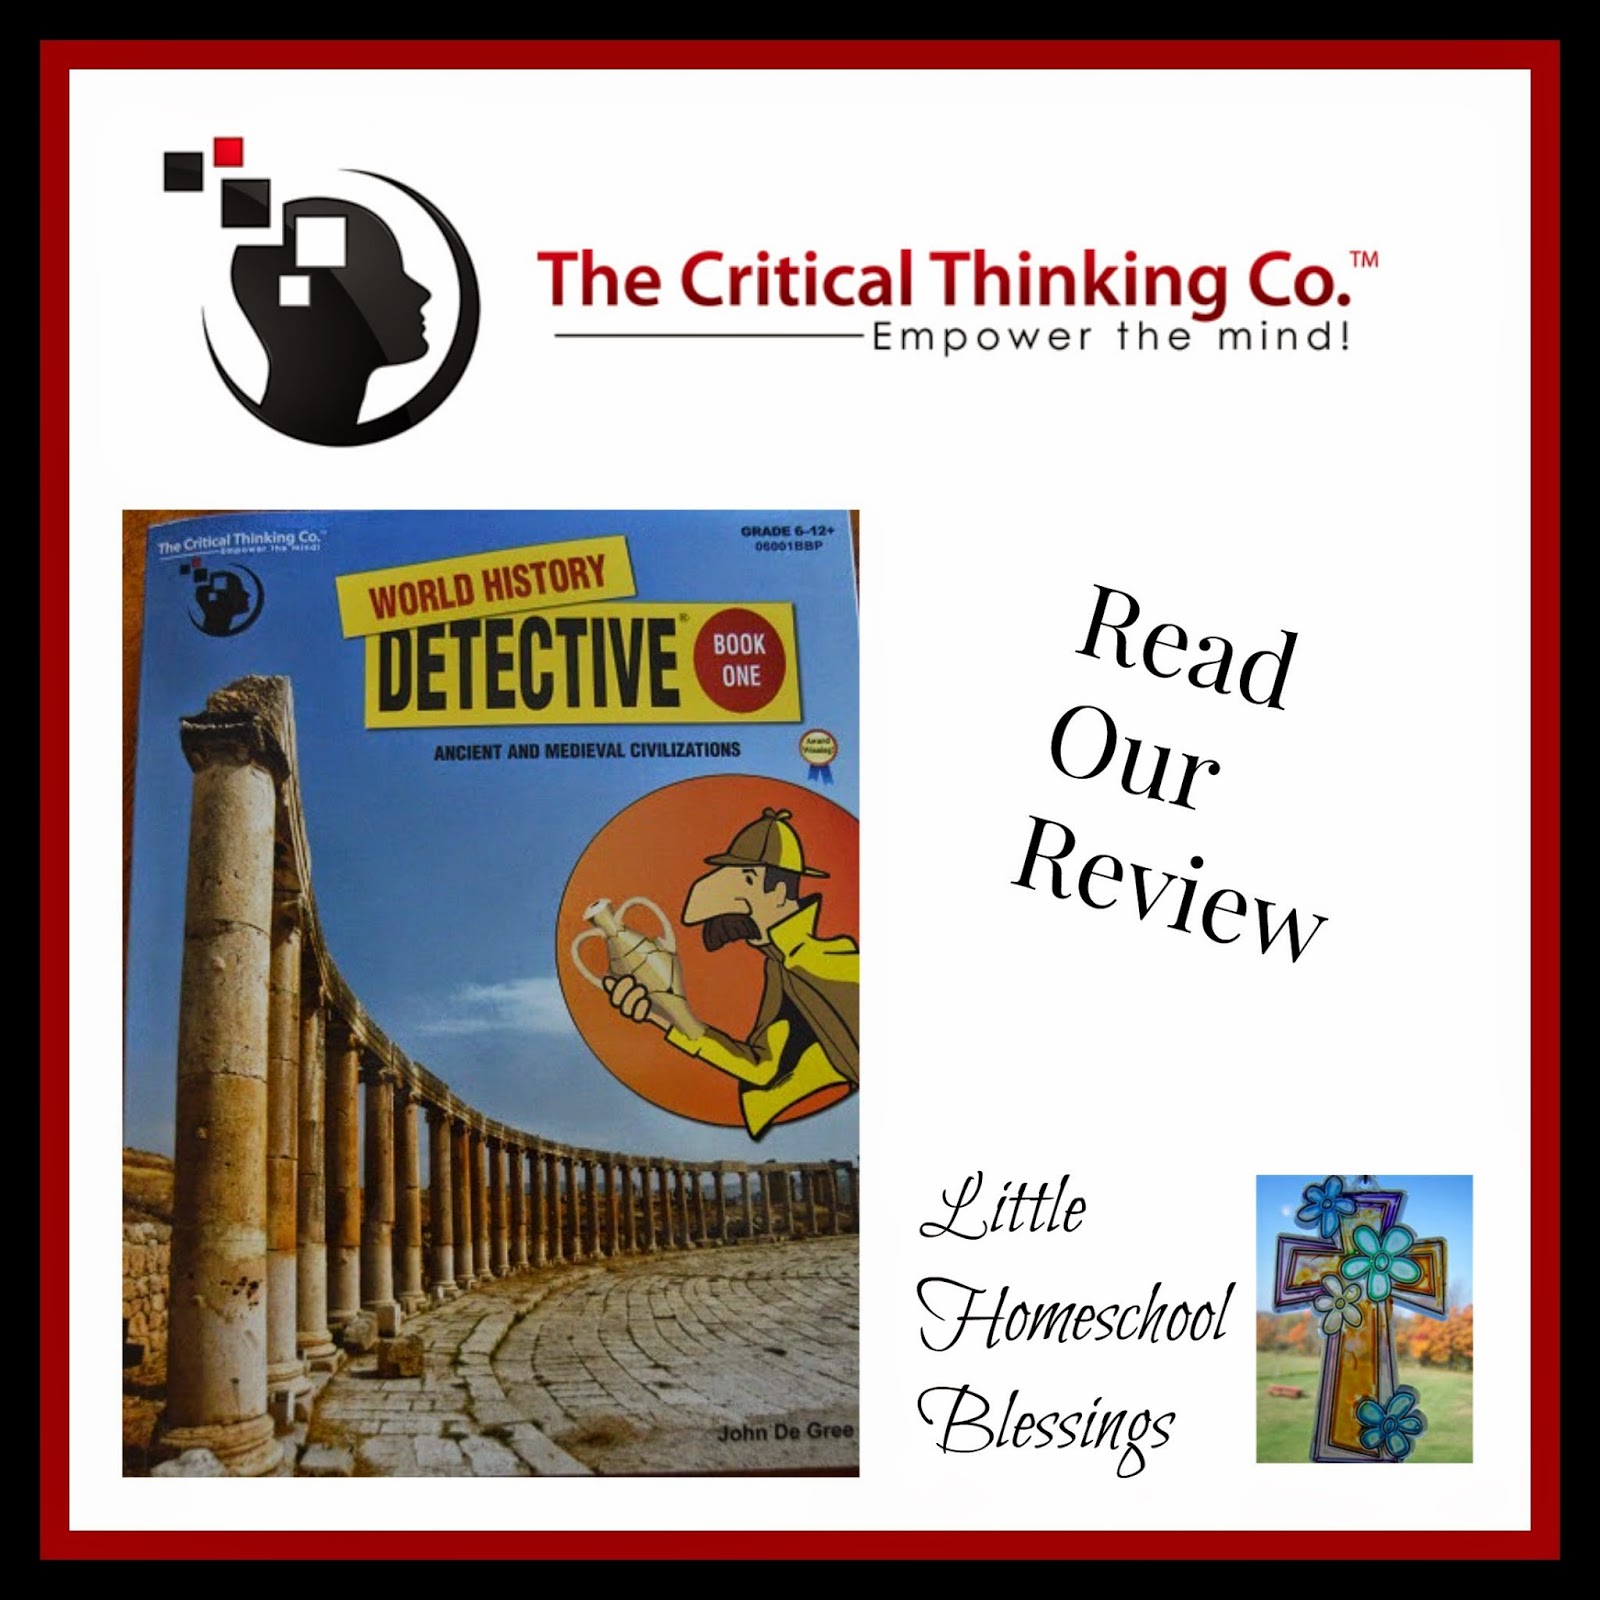 critical thinking detective book 2 answers